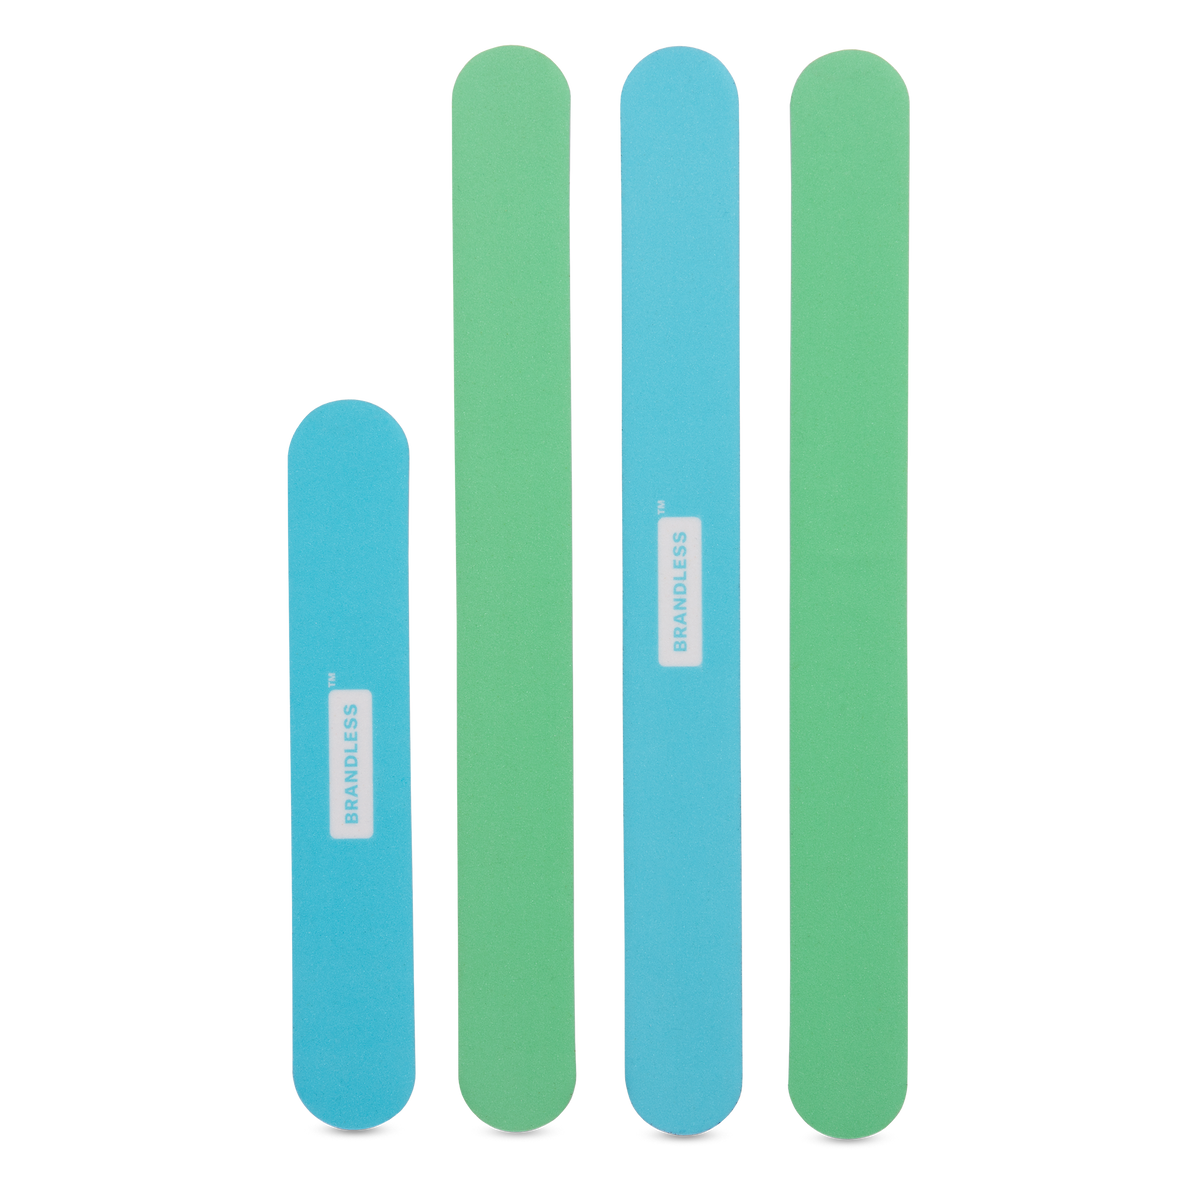 Emery Board Set, showing 3 tall and 1 short boards. Blue and green colors.